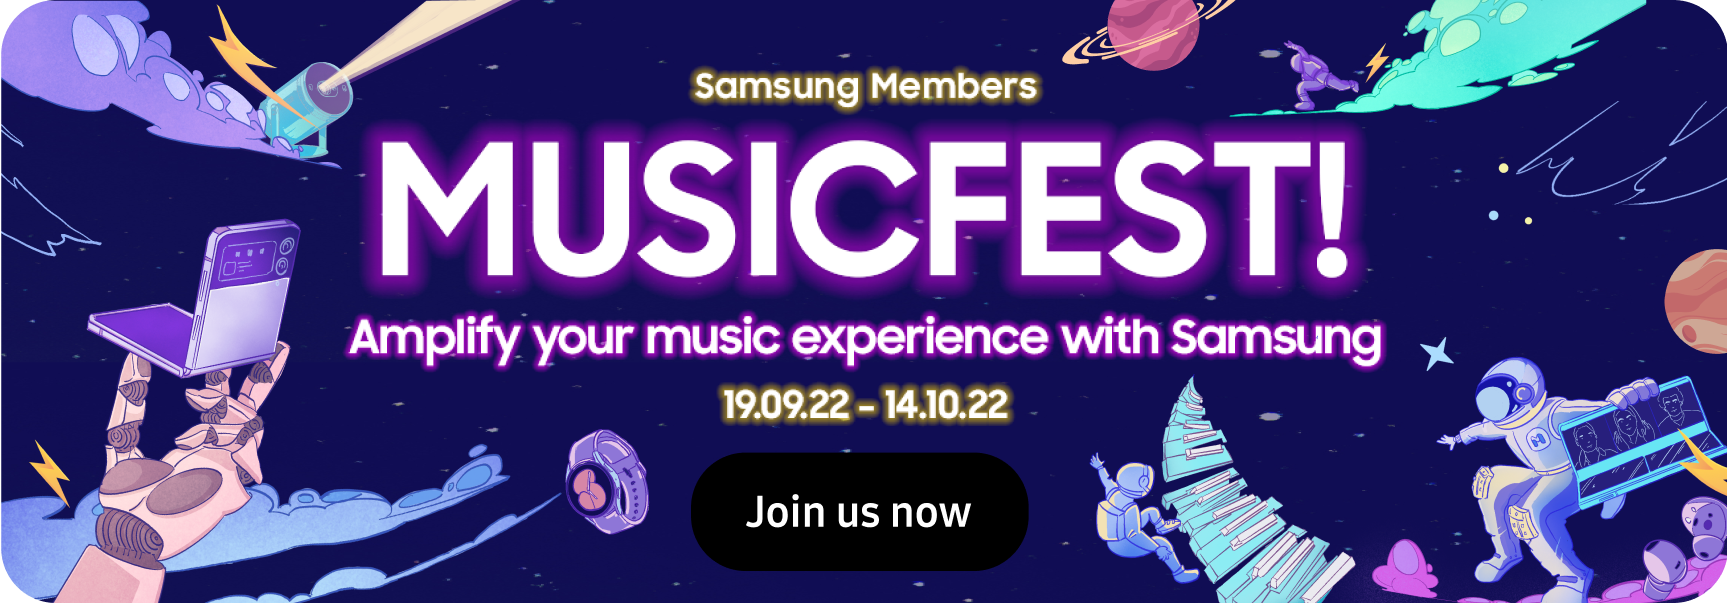 samsung member musicfest amplify your music experience with samsung 19.09.22-14.10.22